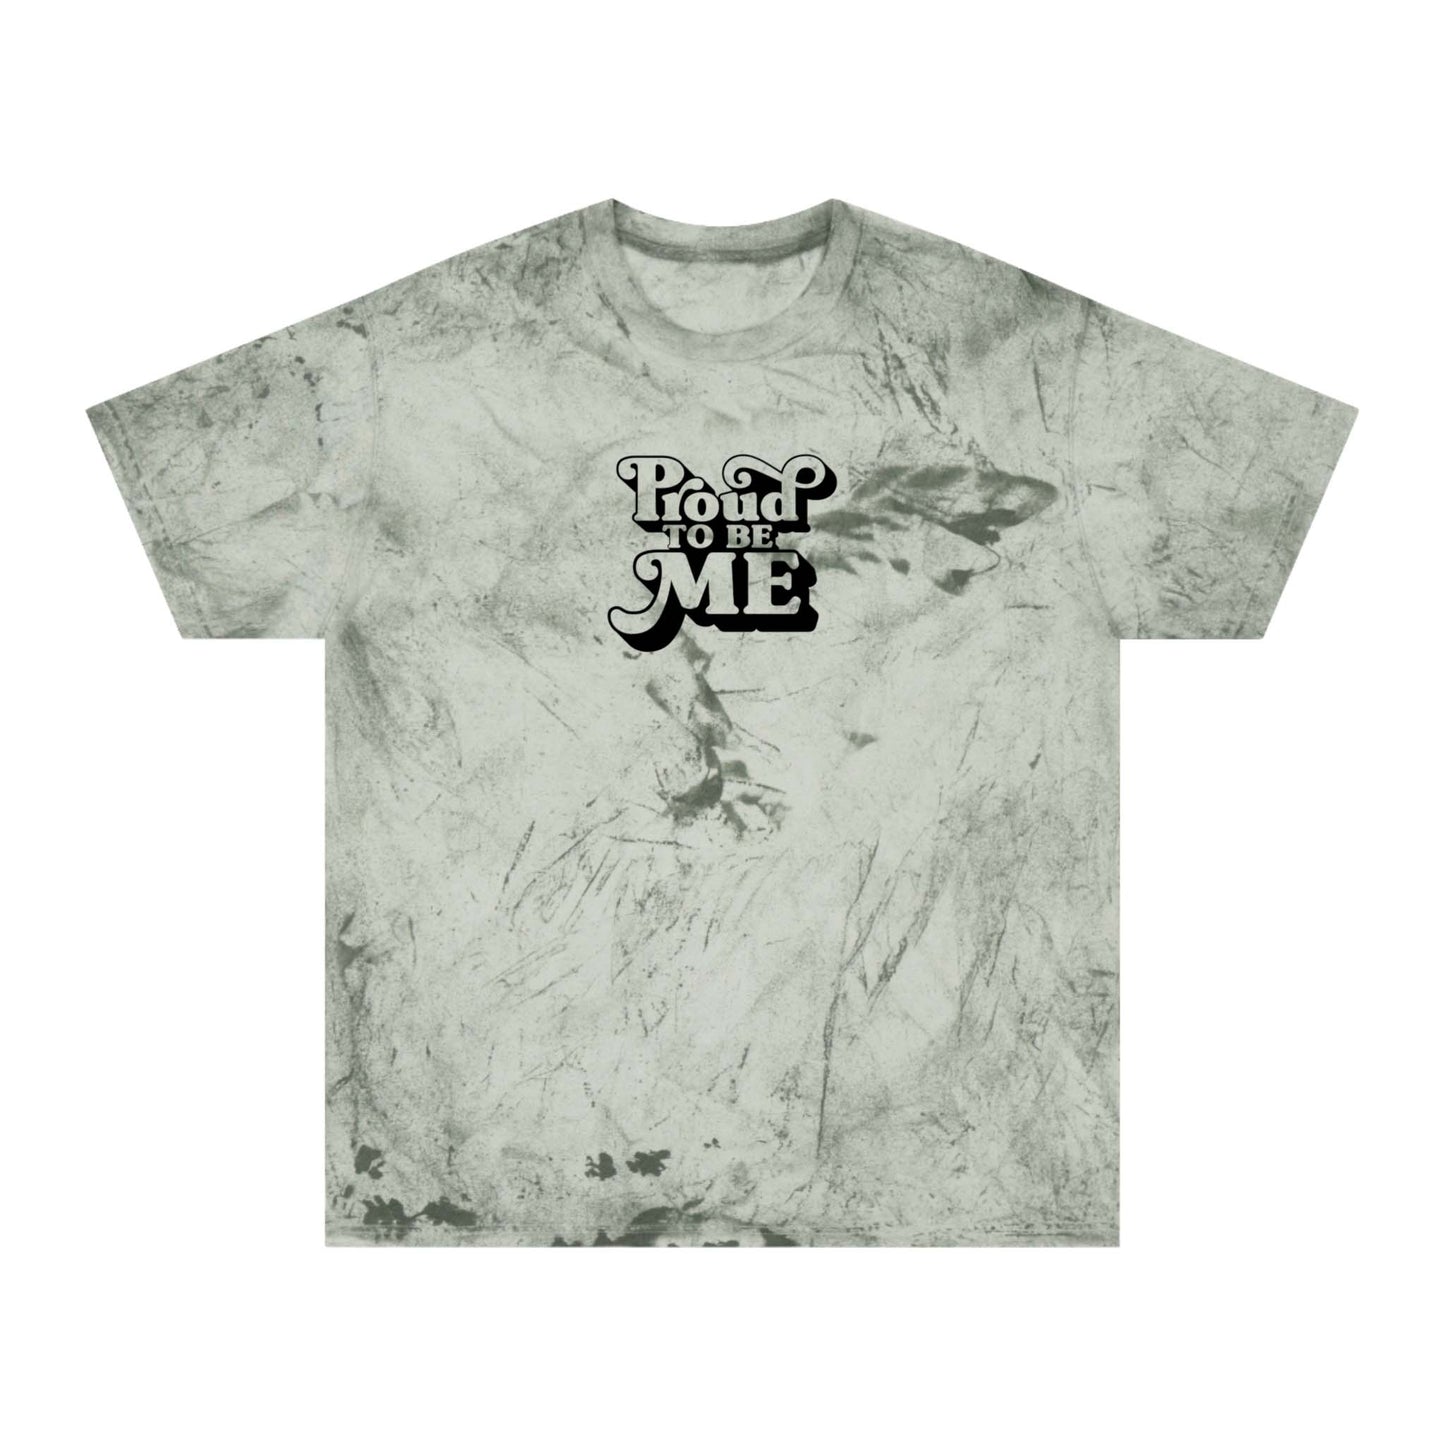 This fern color blast T-shirt has our Proud to be me meme printed at the front of the men’s T-shirt in a black color. Look vintage and proud wearing this T-shirt!